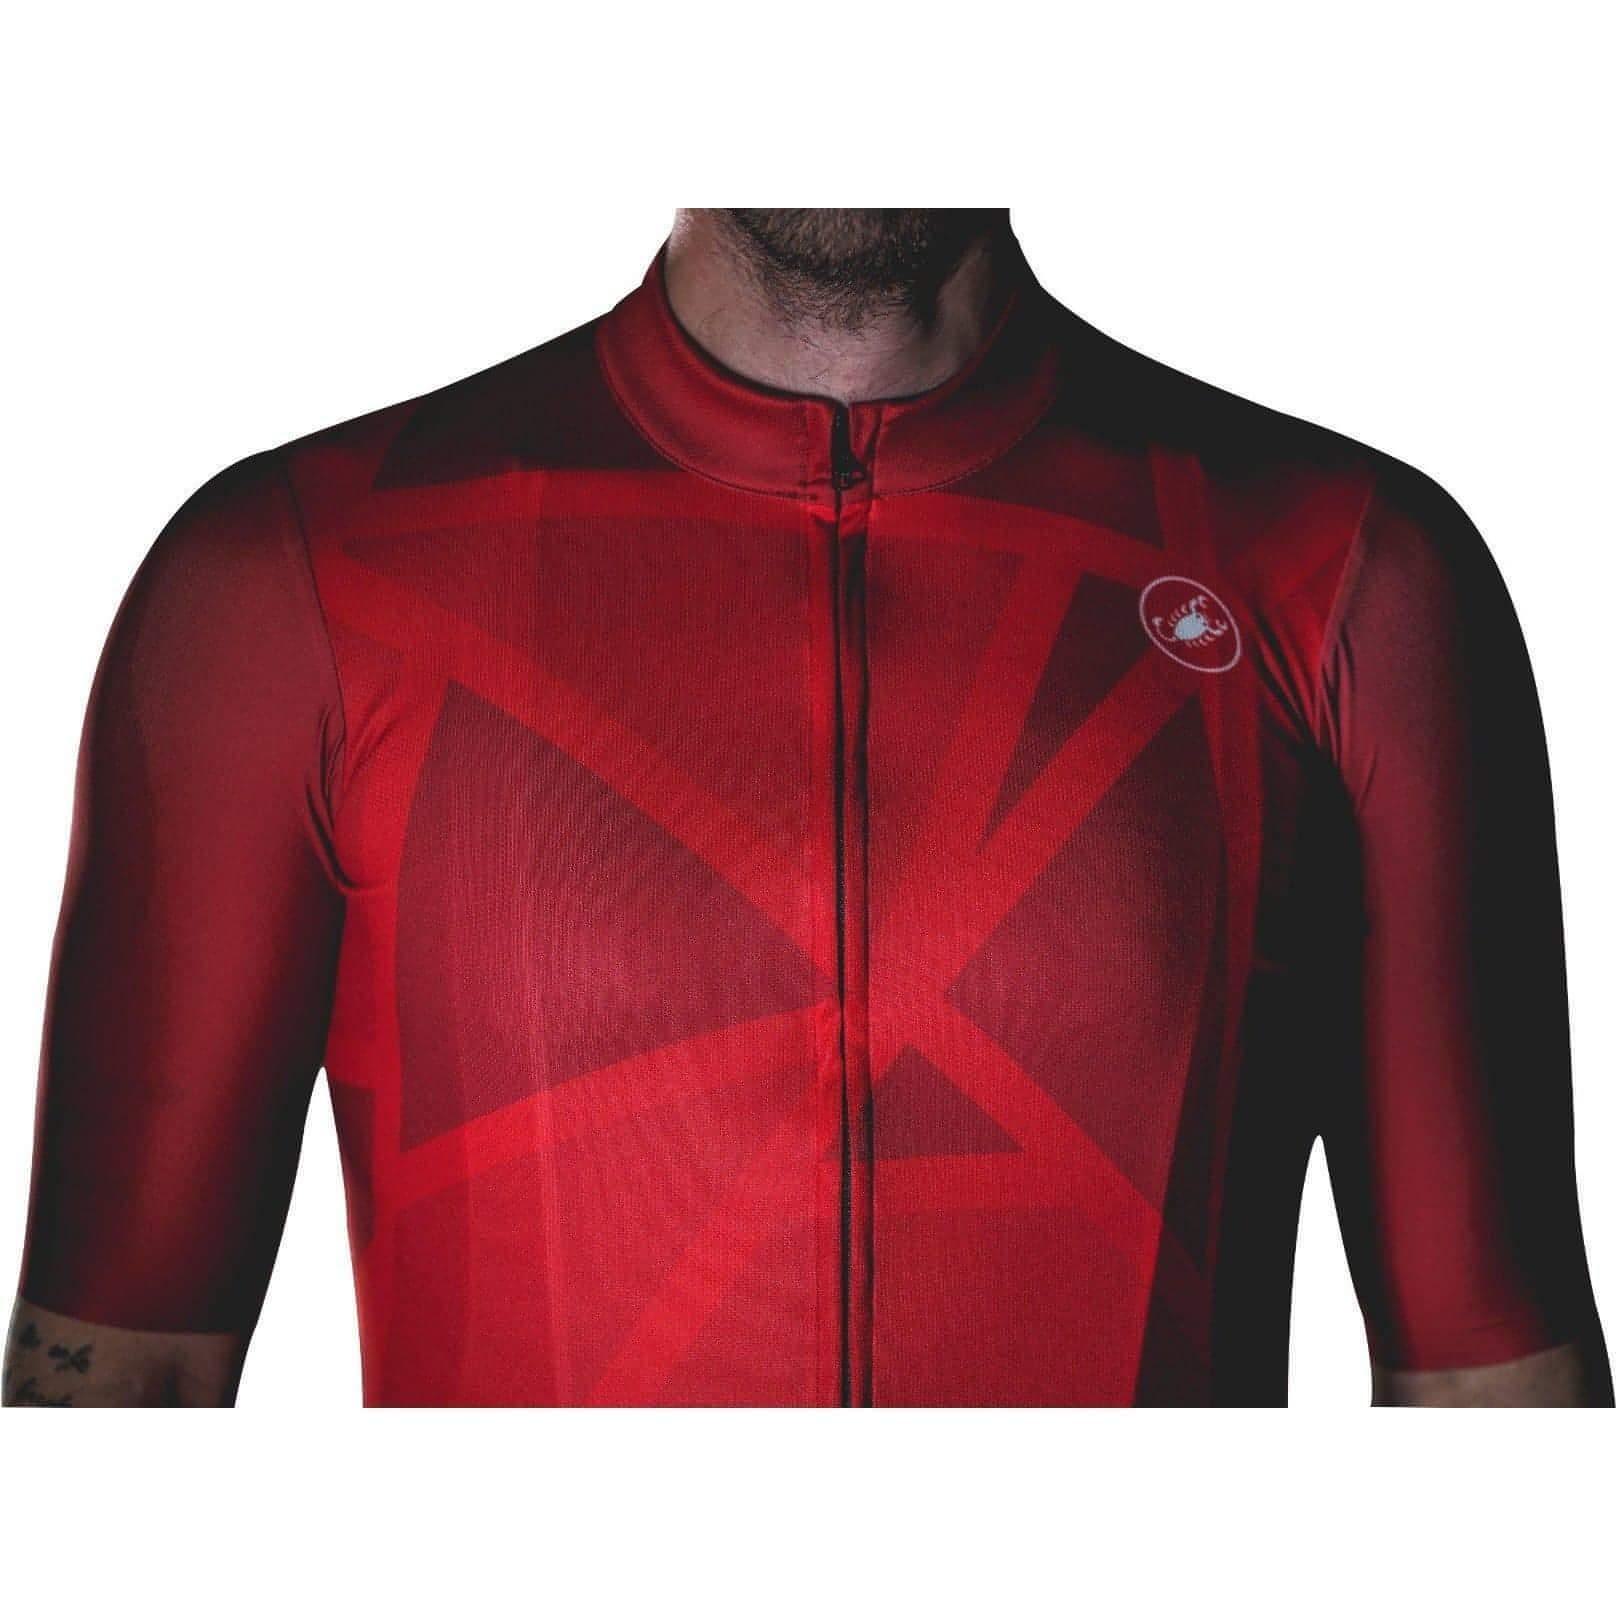 Castelli World Champs Squarda Short Sleeve Mens Cycling Jersey - Red - Start Fitness